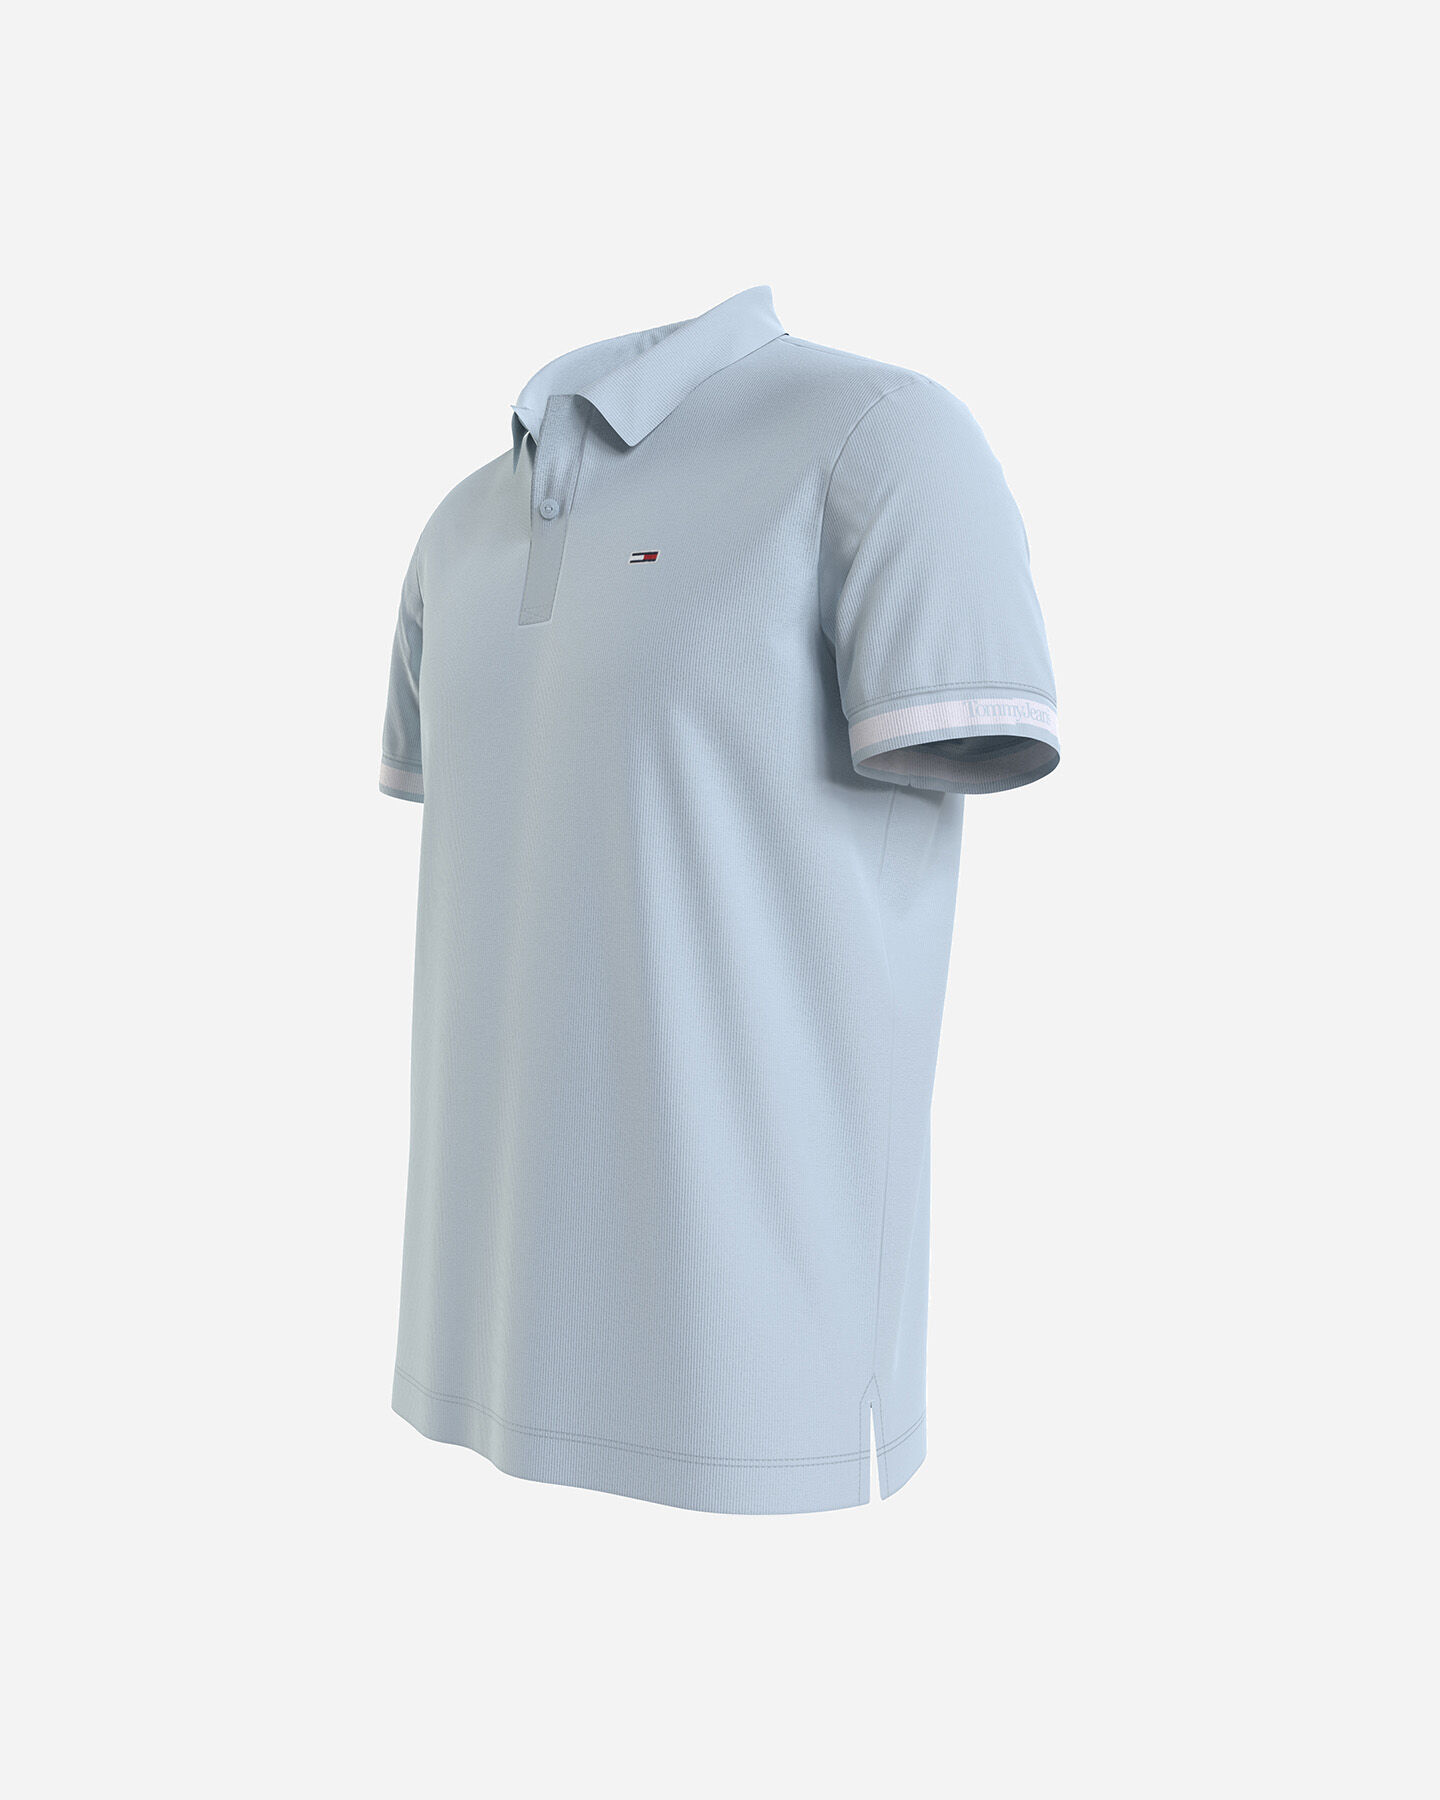  Polo TOMMY HILFIGER PIQUET STRETCH M S4122757|CYO|S scatto 1